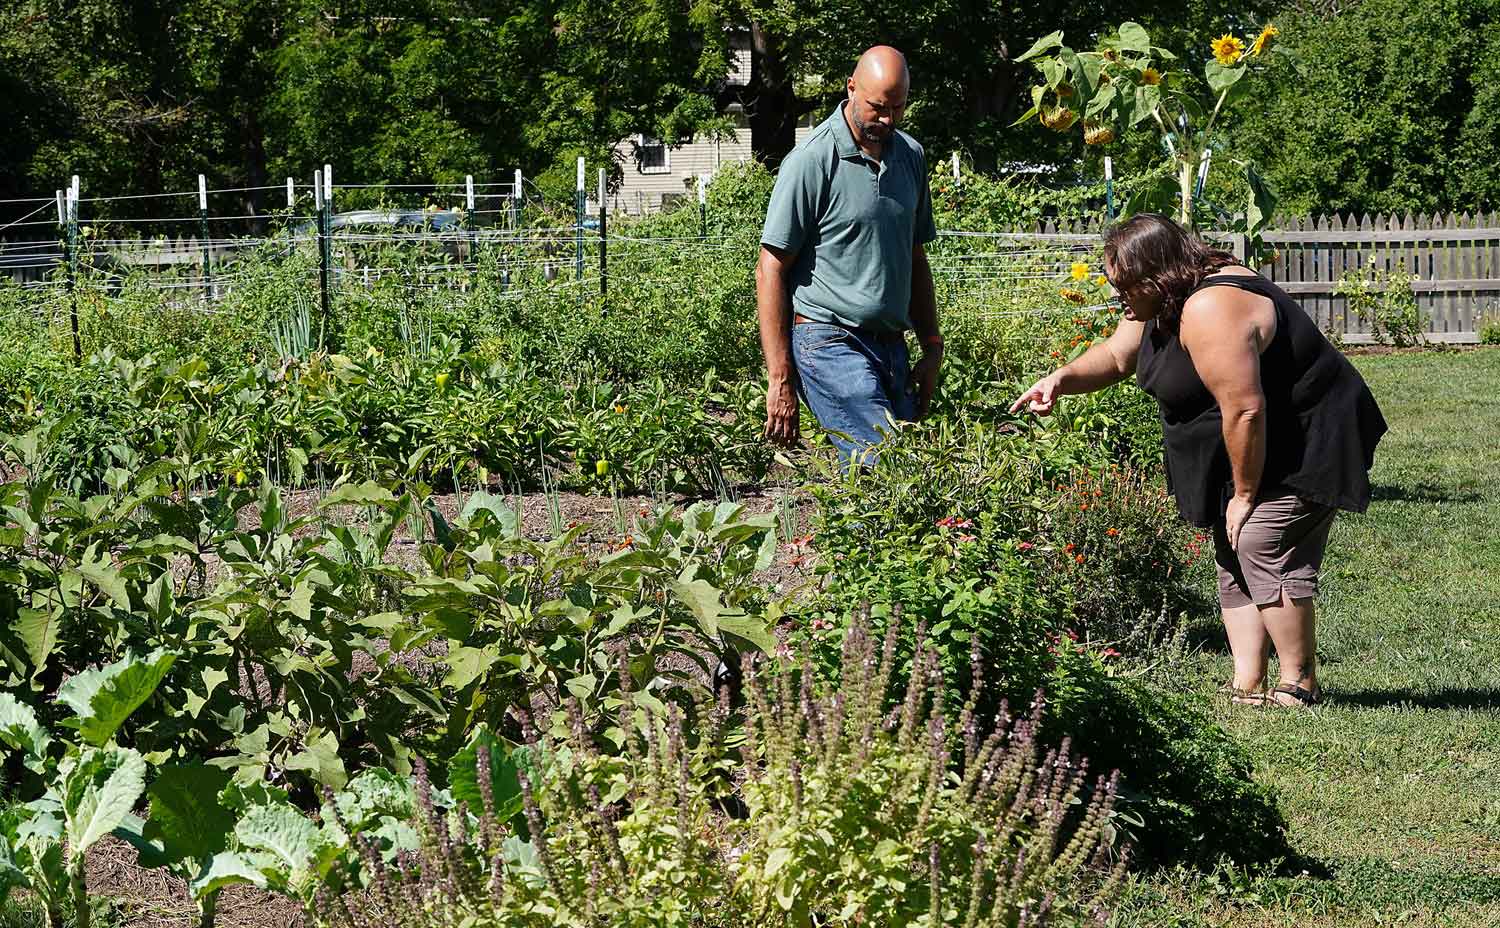 urban agriculture, gardening in the community